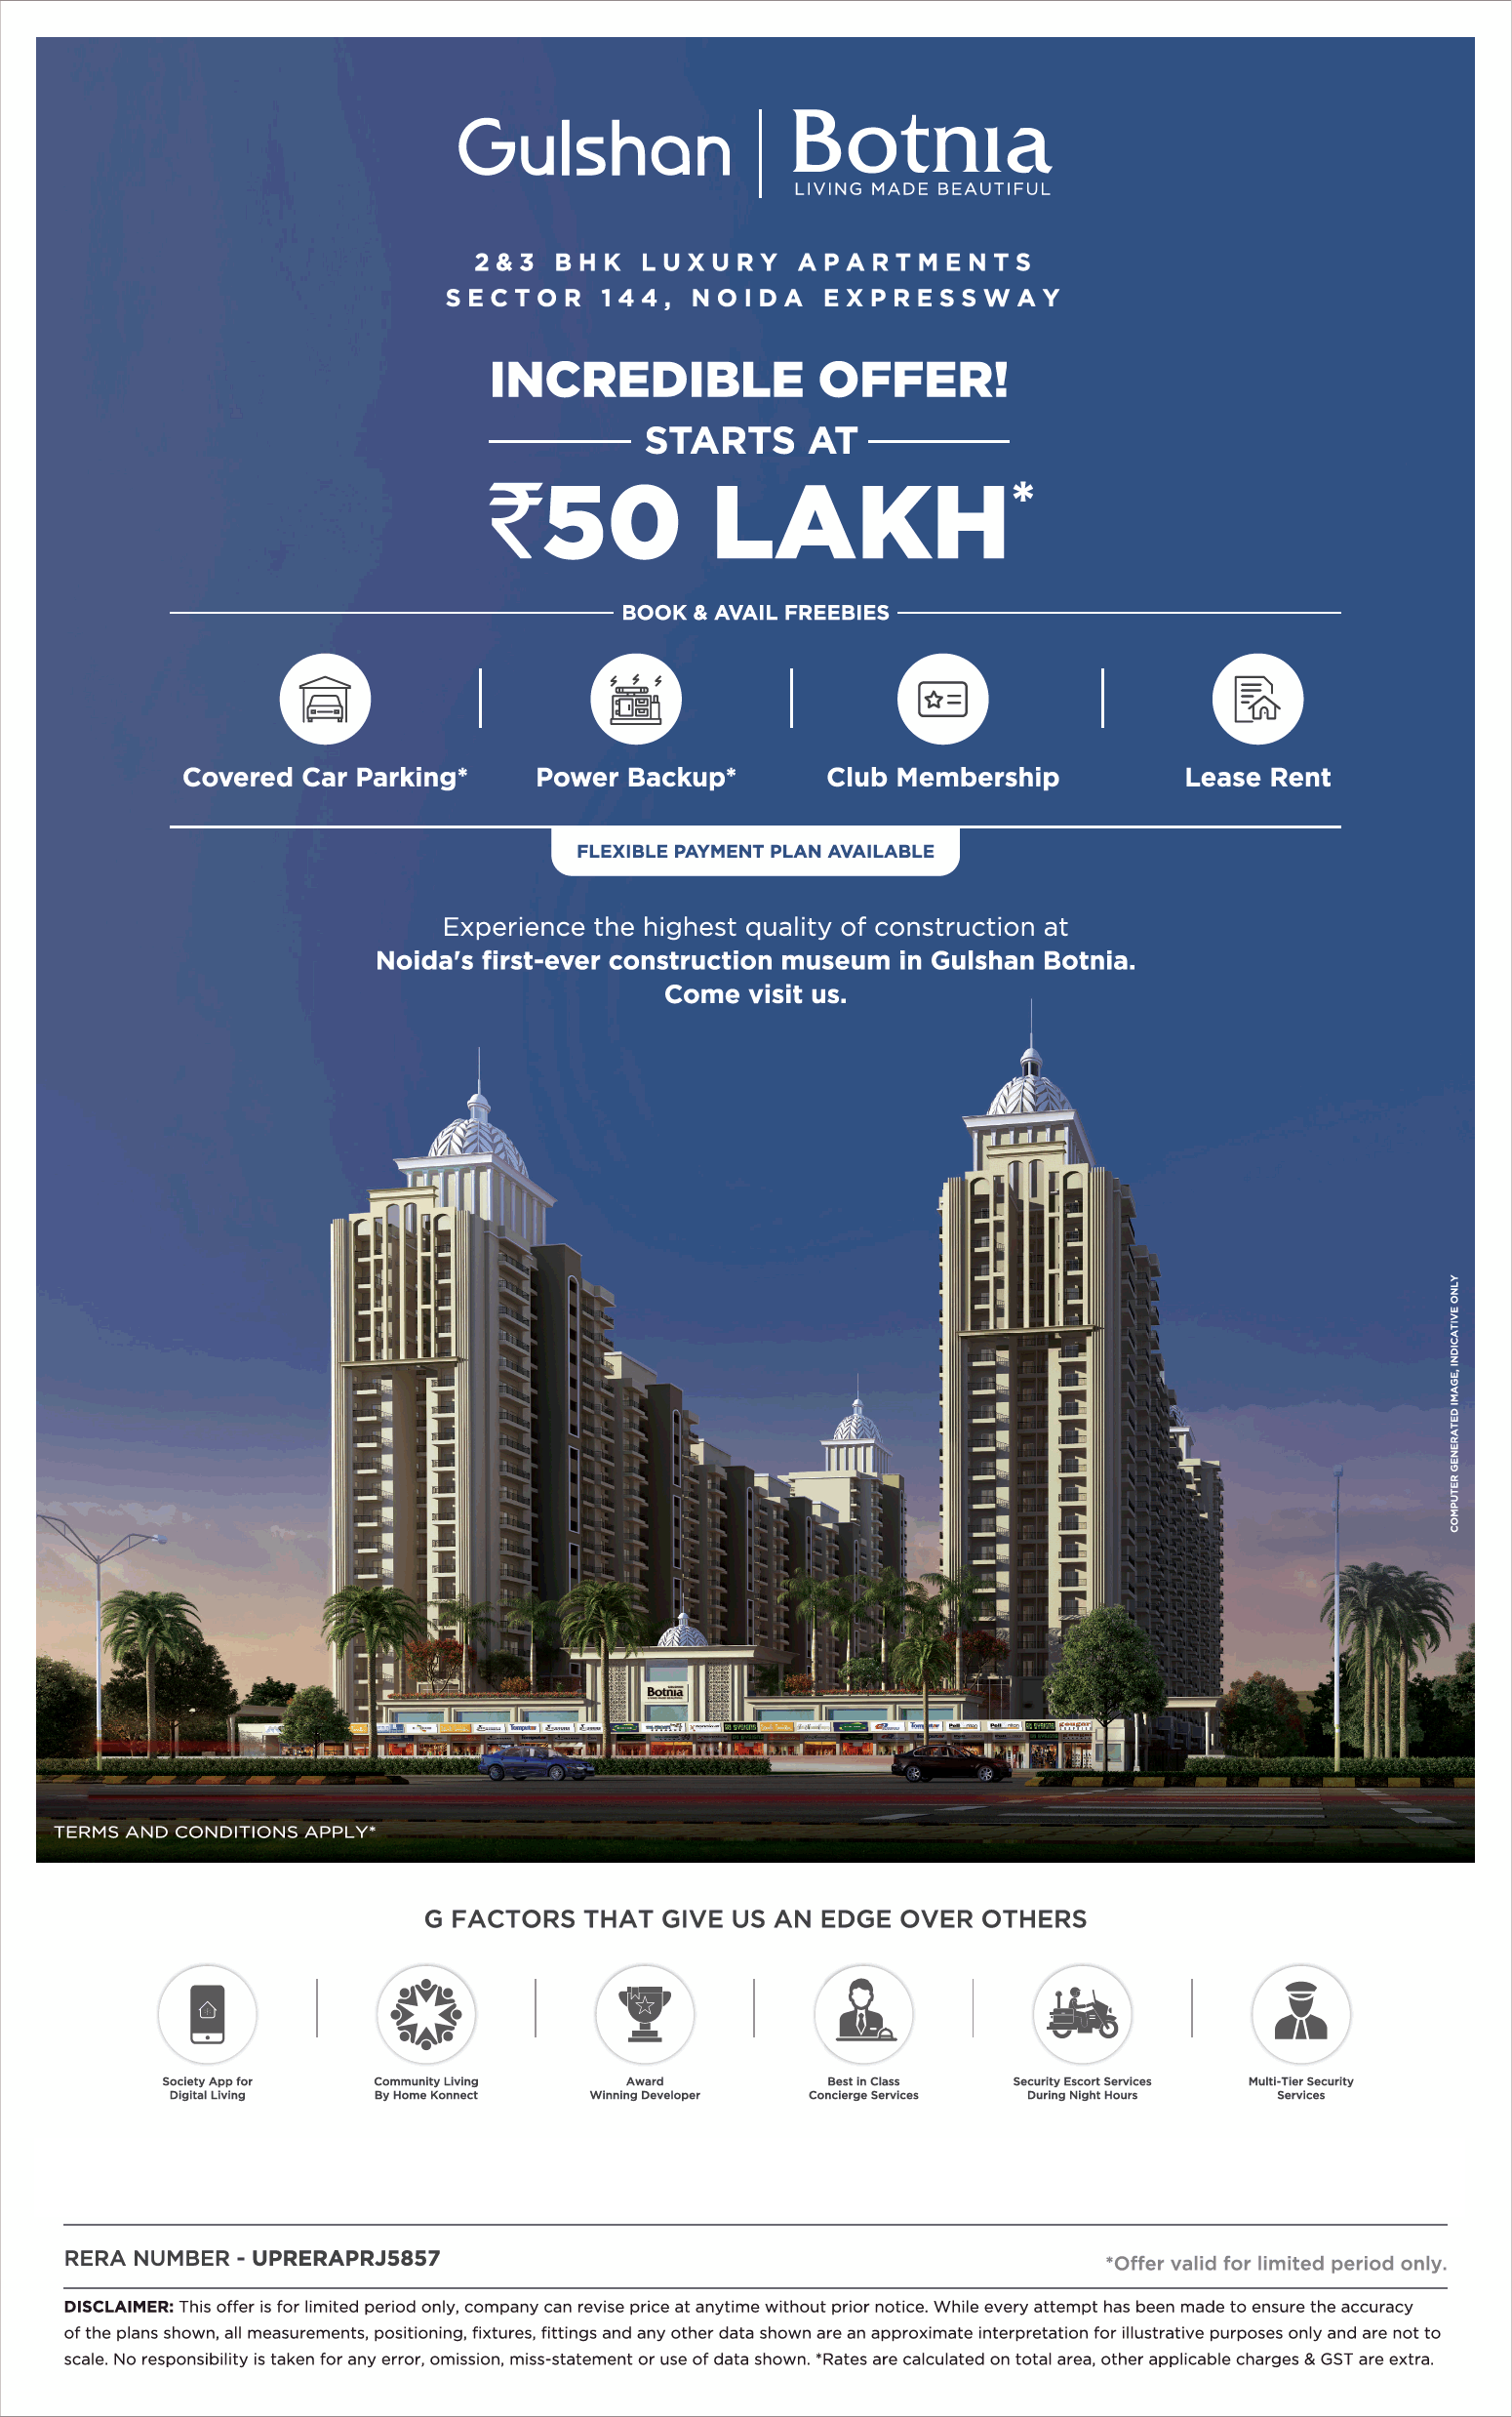 Book 2 and 3 BHK apartments incredible offers Rs 50 Lakh at Gulshan Botnia, Noida Update